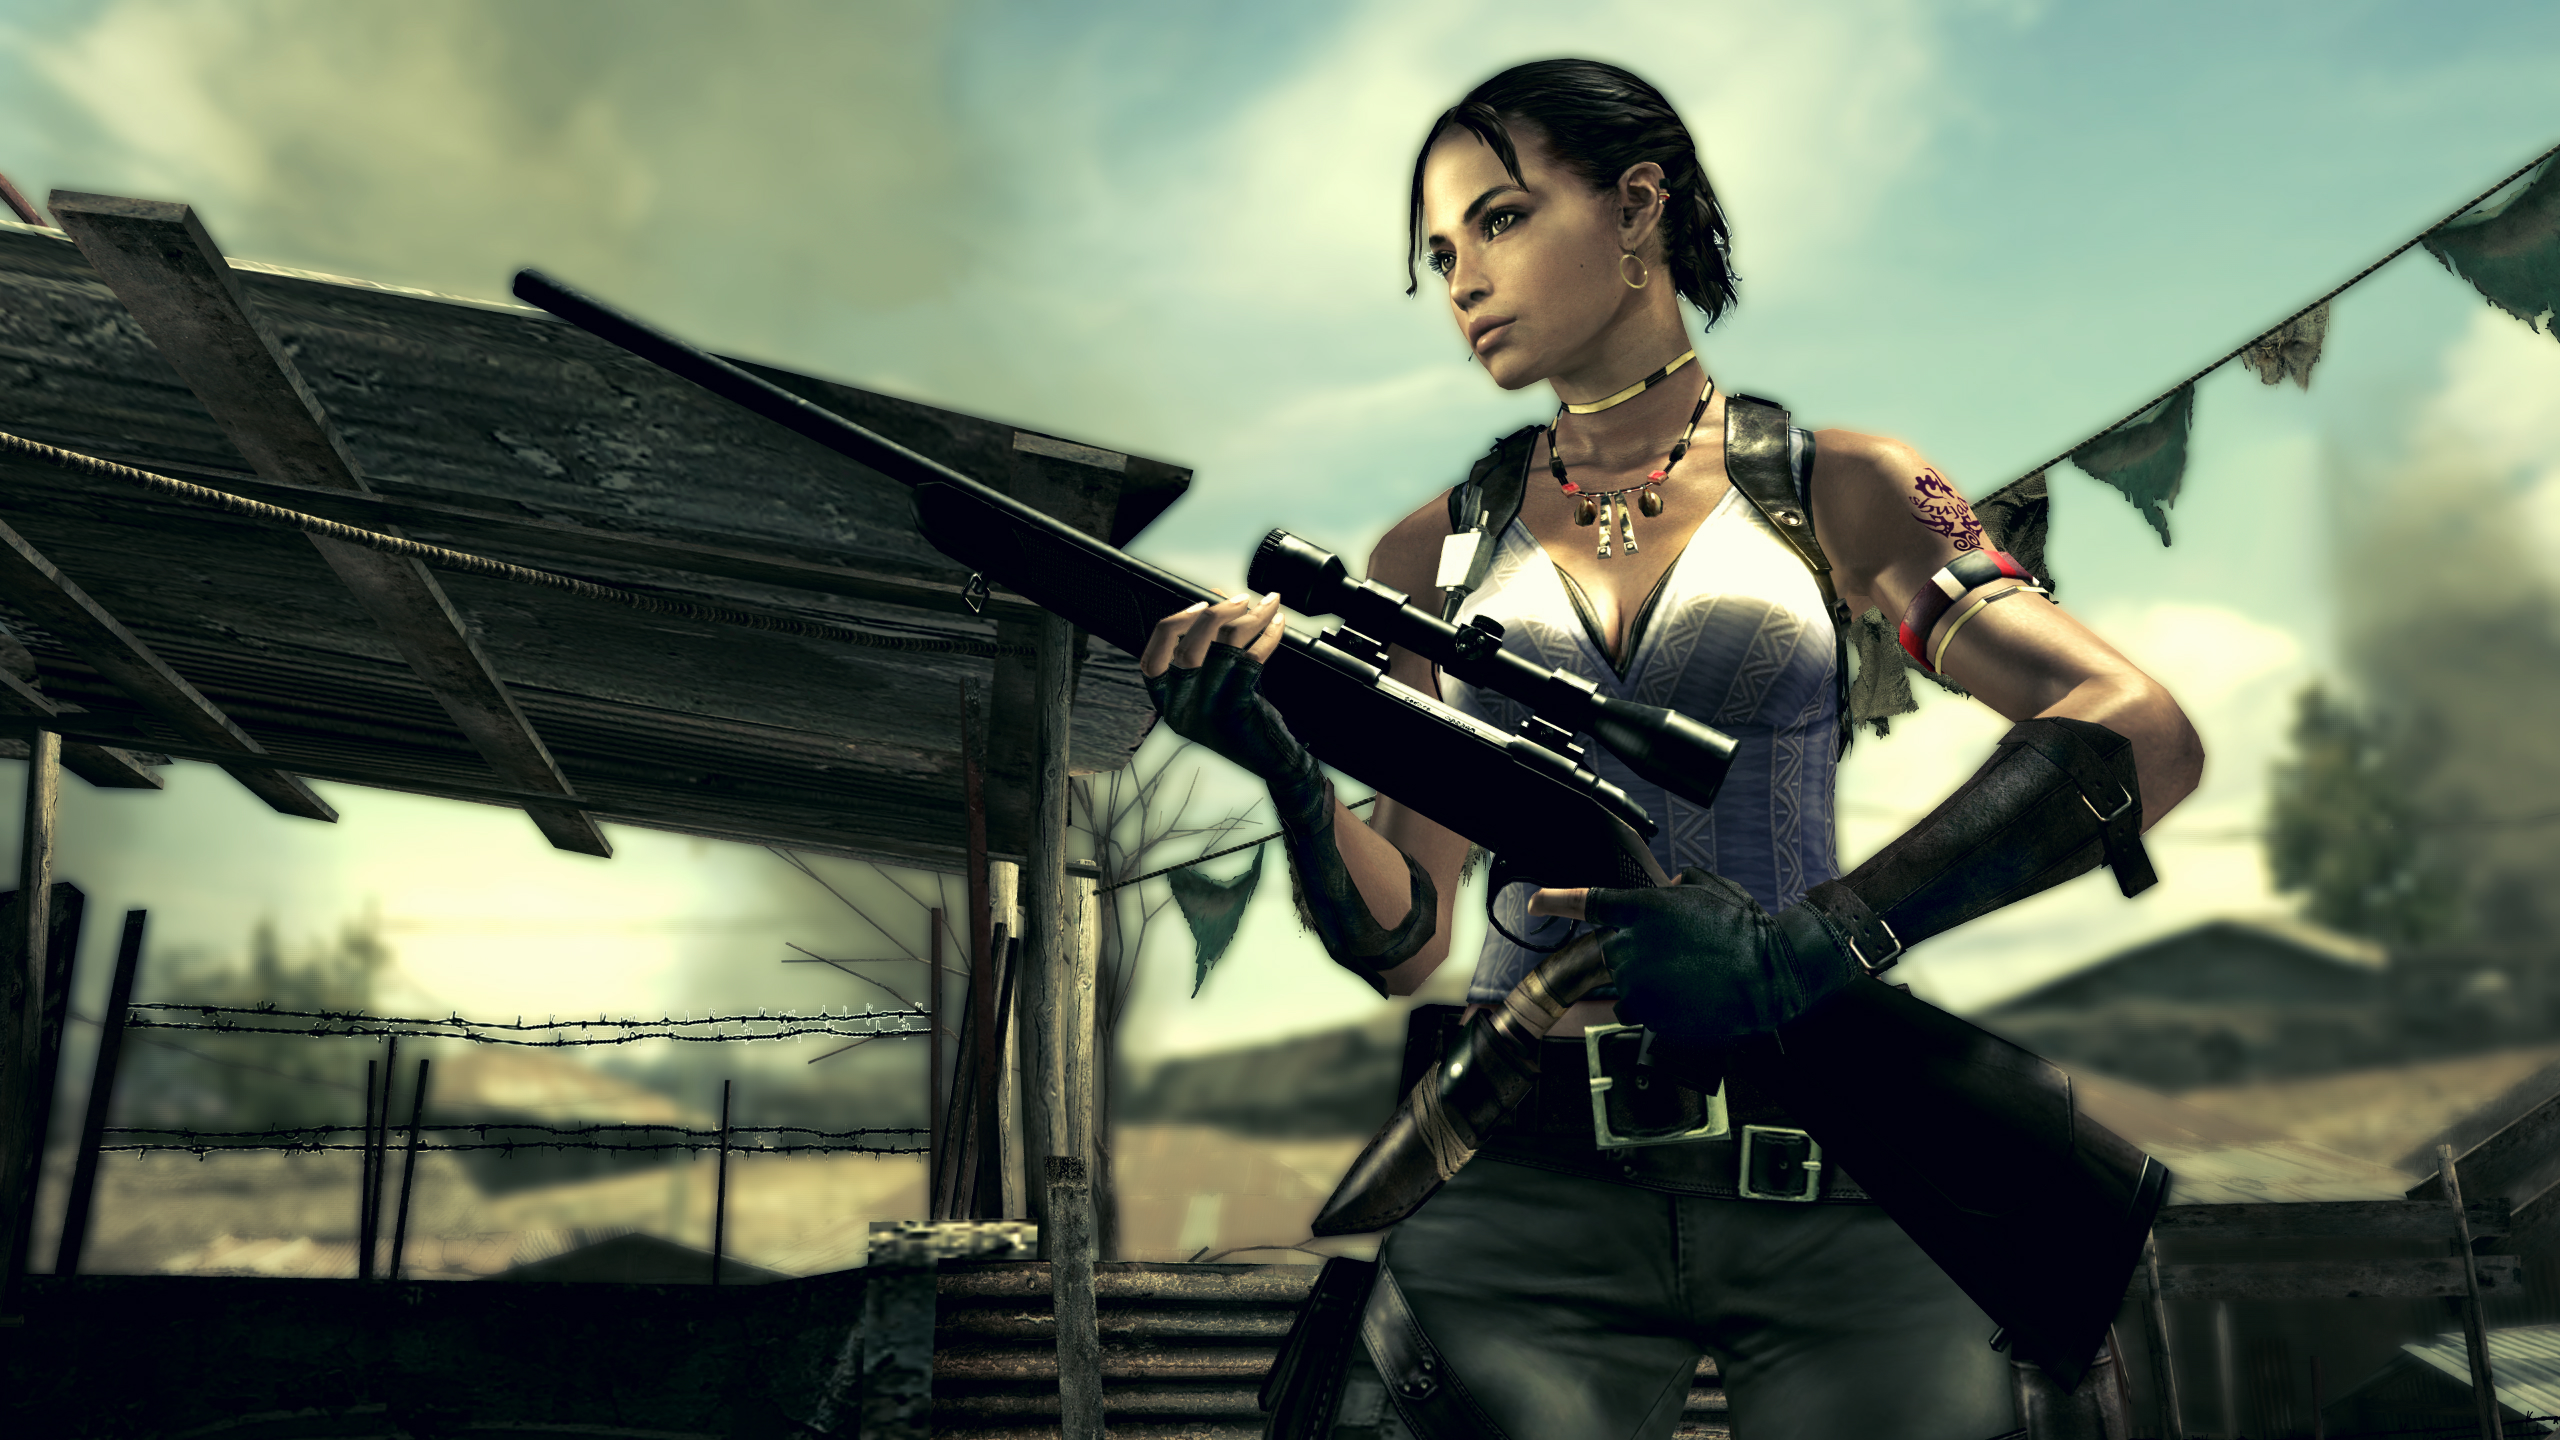 You Can Play Resident Evil 5 And Resident Evil 6 Demos Before Its Launch On Switch